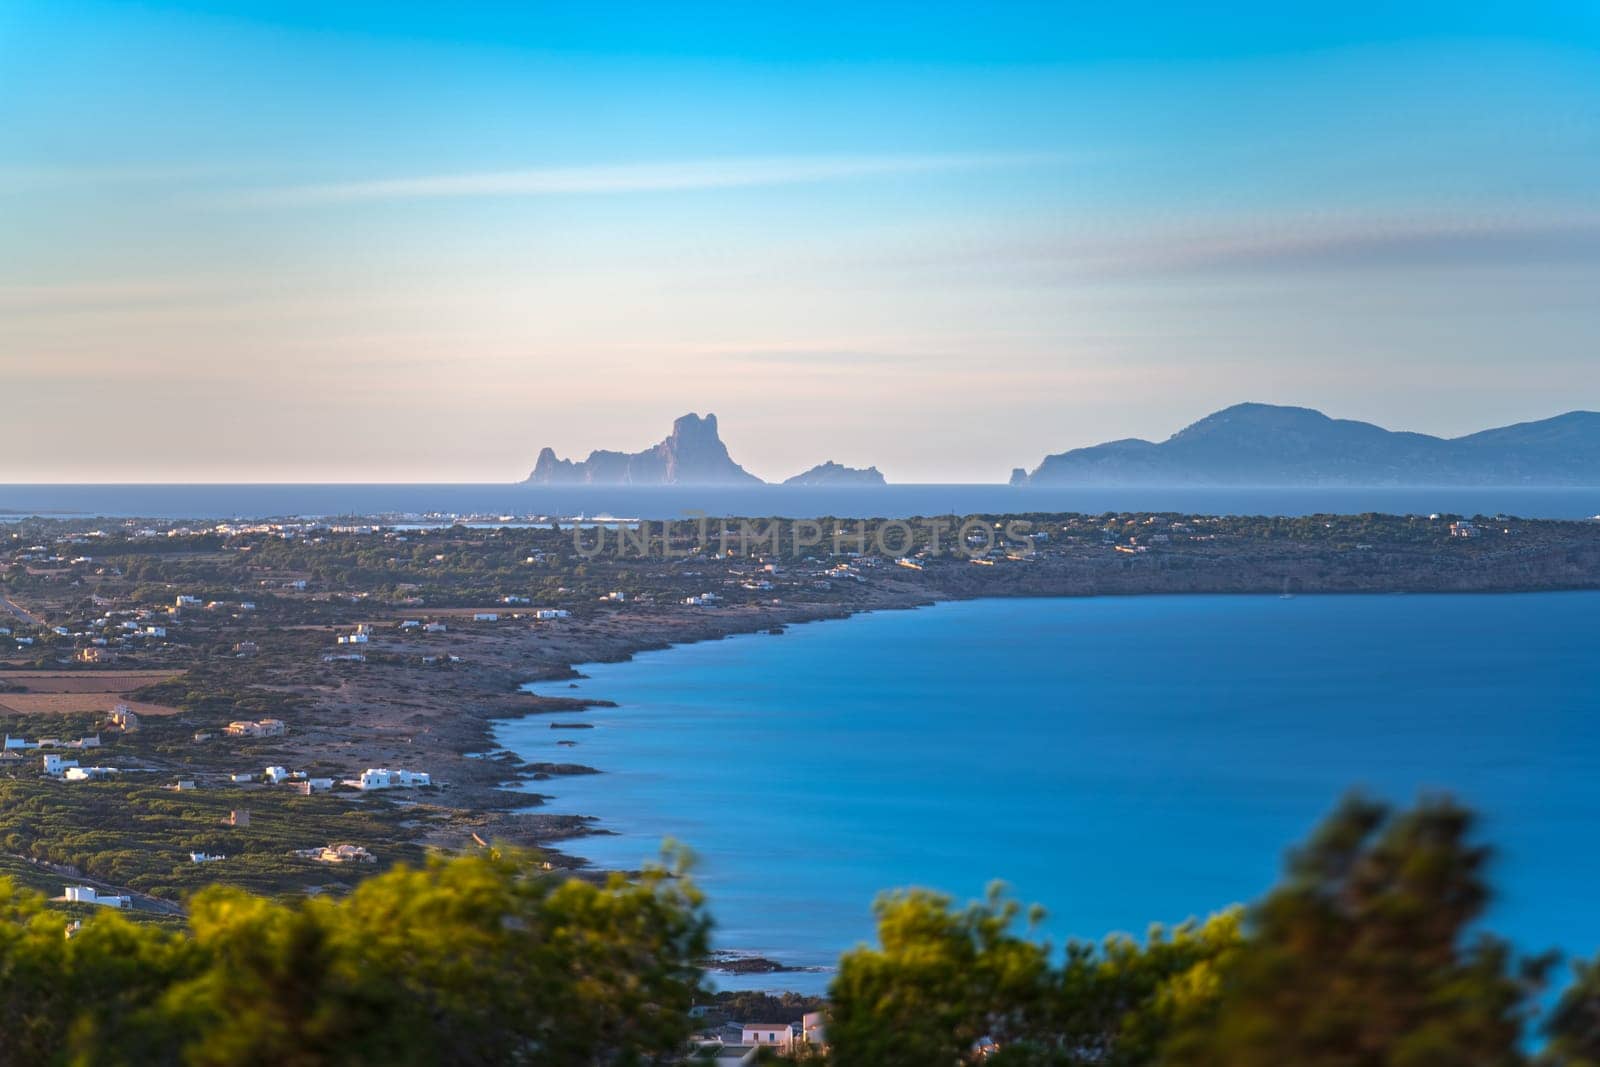 Stunning long exposure photo of Formentera Island's clear bay, with Ibiza and Es Vedra silhouetted in the background.